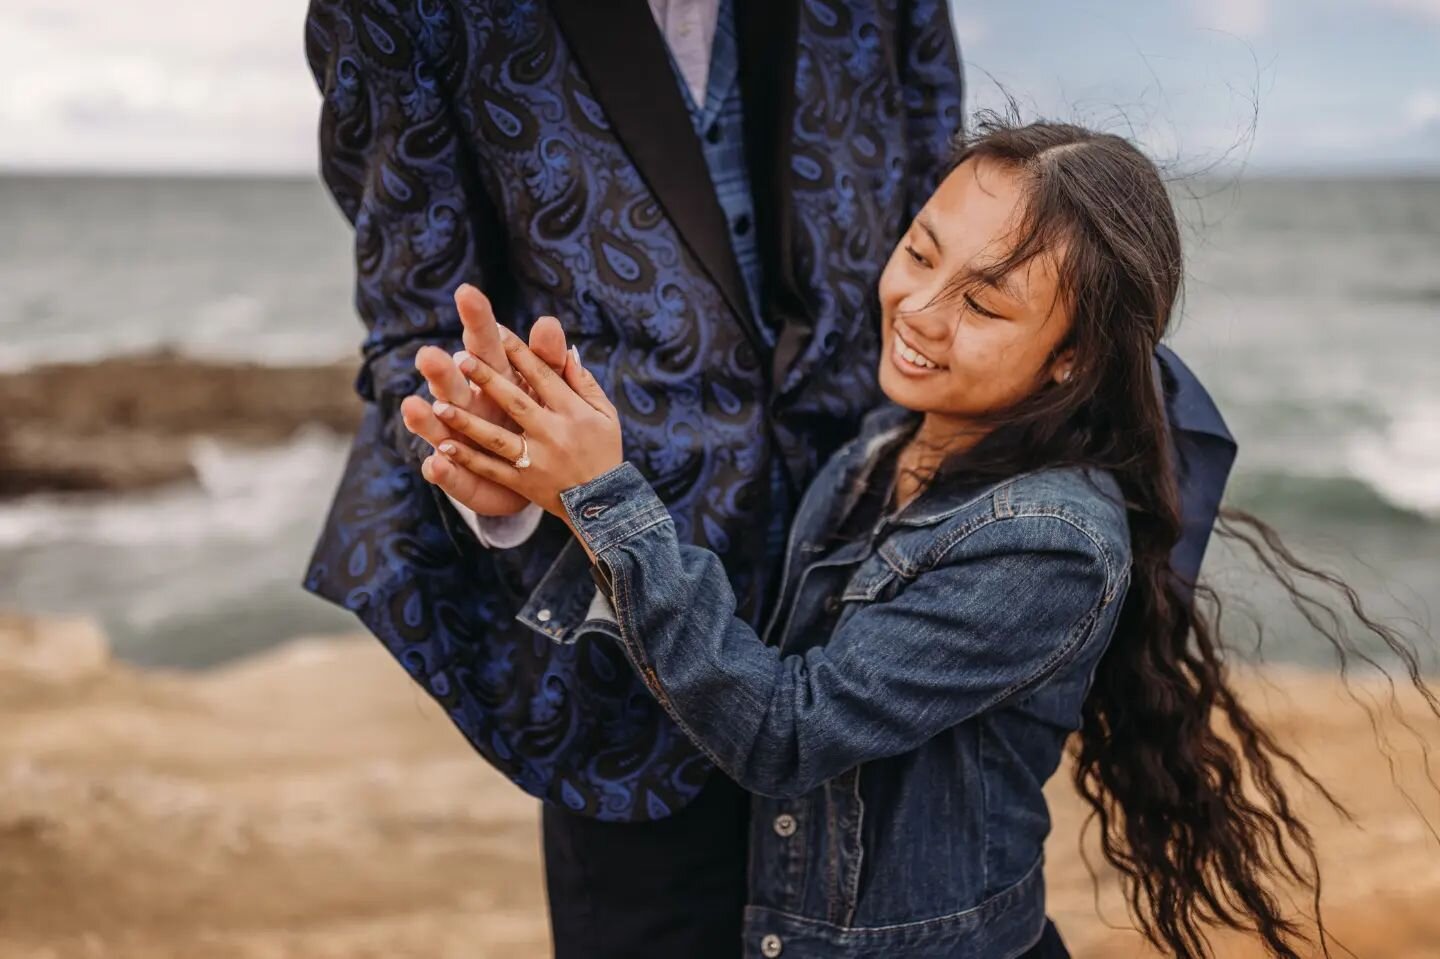 Sometimes I can't decide on a specific photo so I have to share them all! Which of the 4 are your favorite? 
@opposites_attract2021 
@7foot_caleb 
@naomi.e0011224

#sandiegocouples
#sandiegocouplesphotographer #supriseproposal #engagementphotos #sand